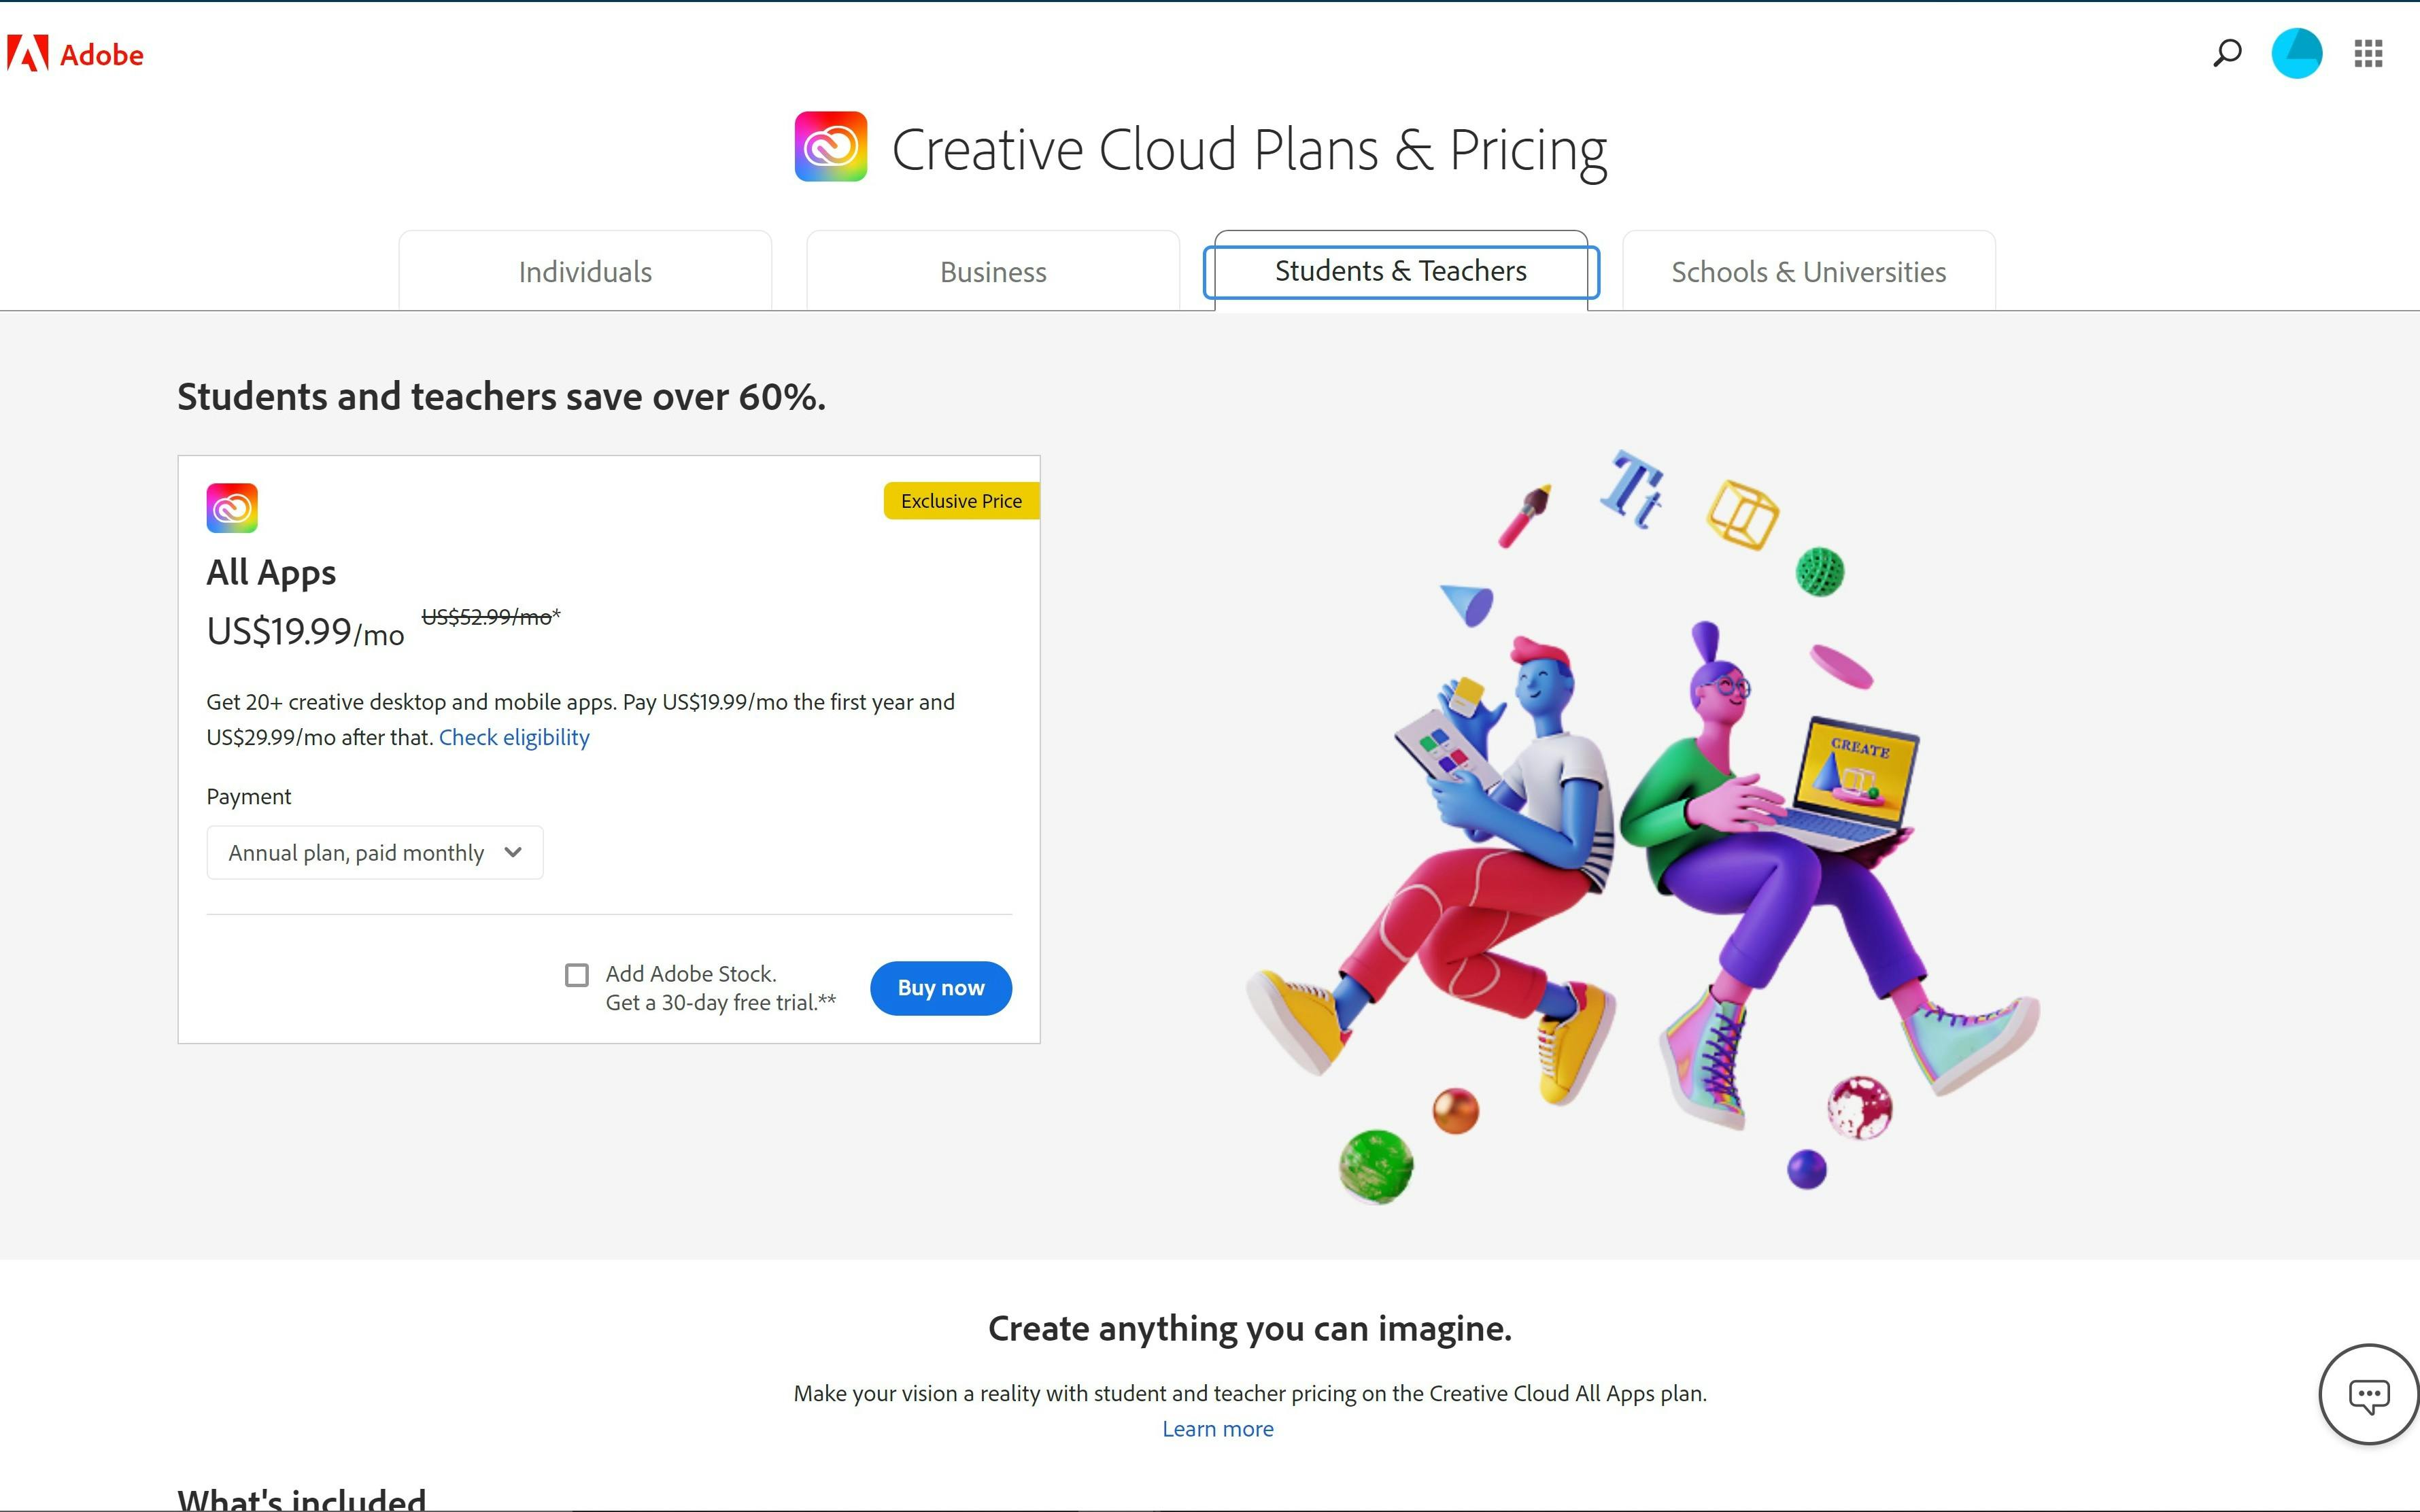 A screenshot of Adobe Creative Cloud plans and pricing for students and teachers.